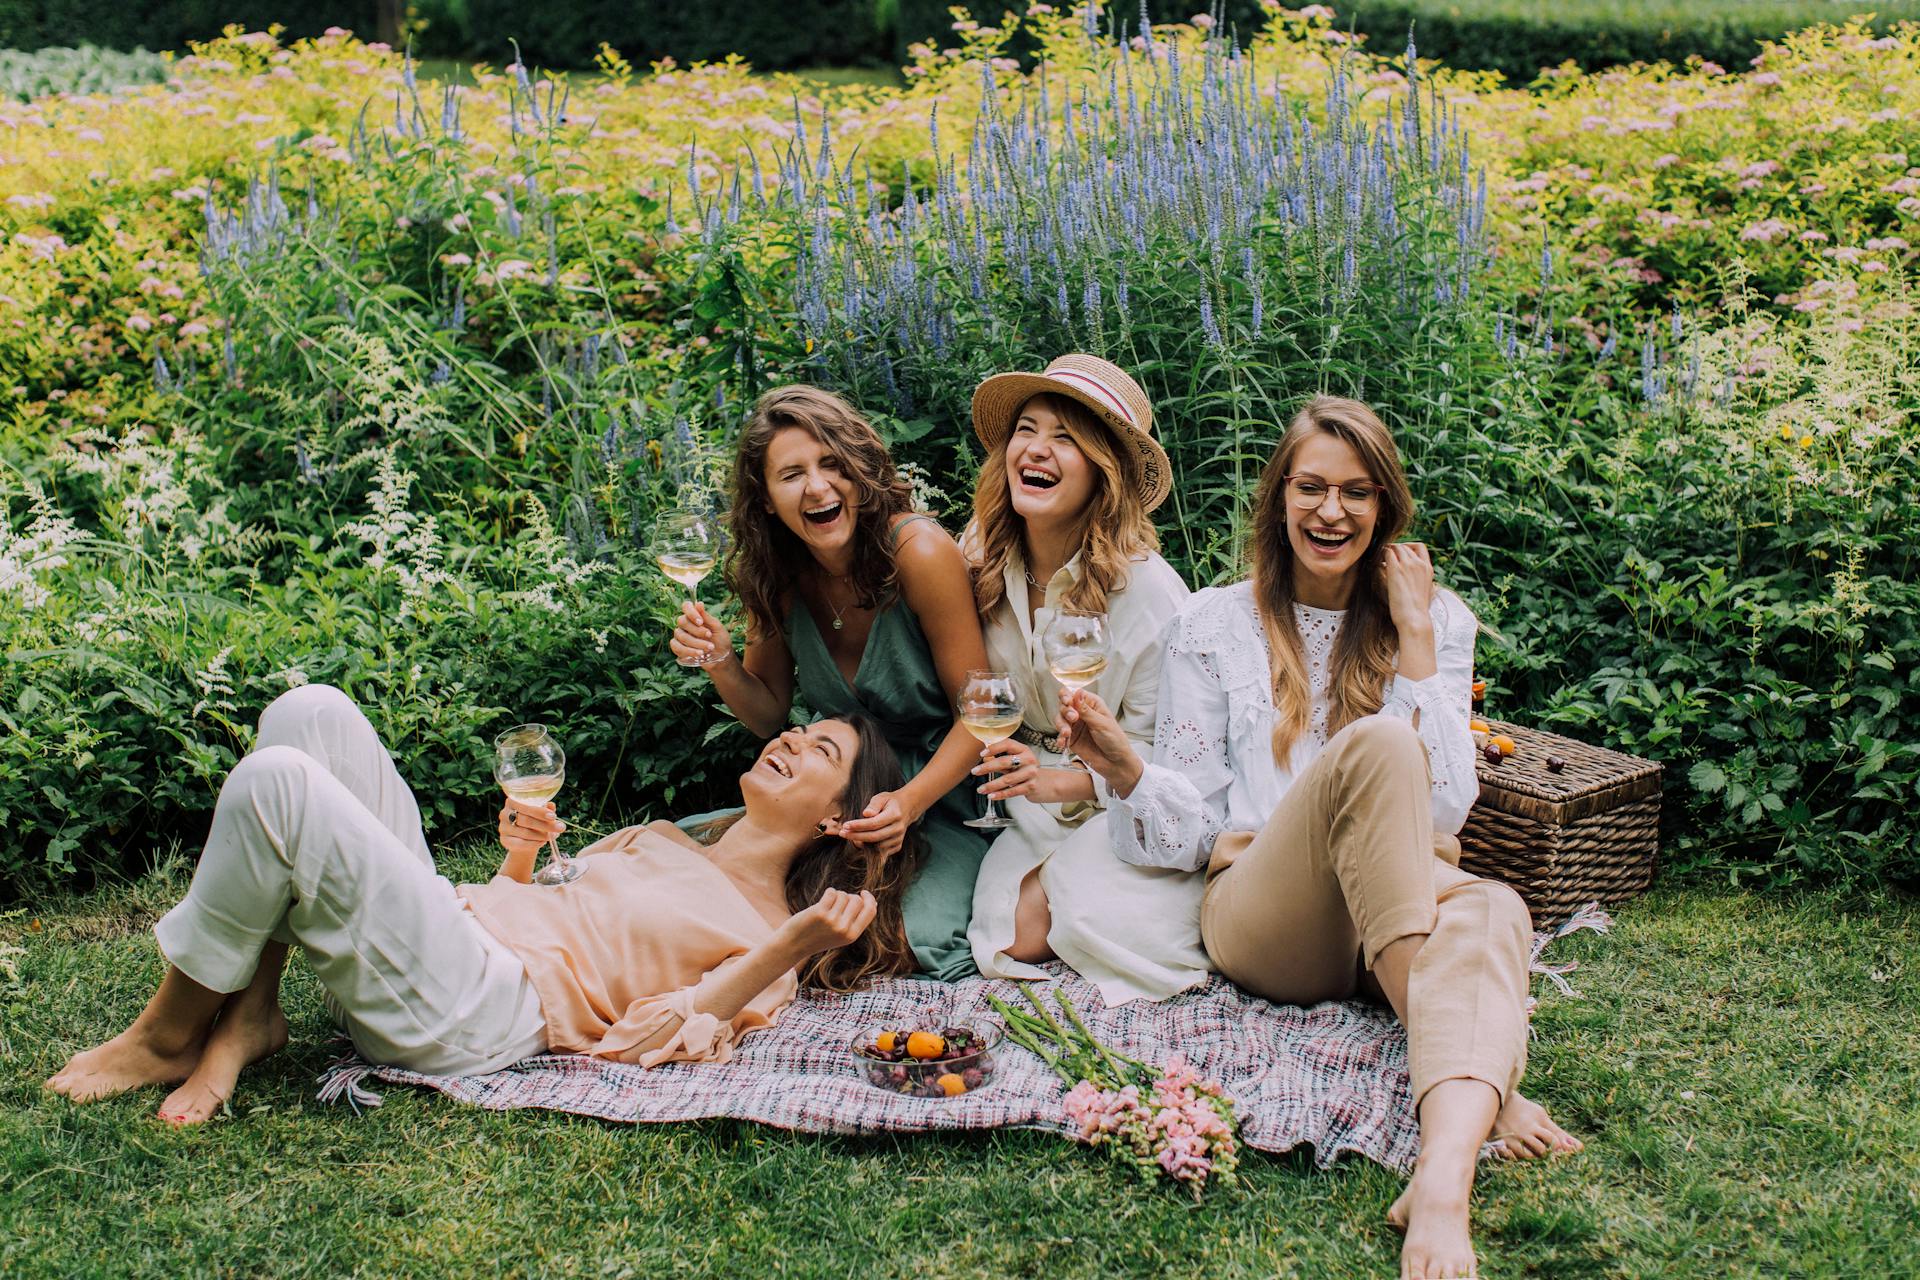 A group of friends having a picnic | Source: Pexels